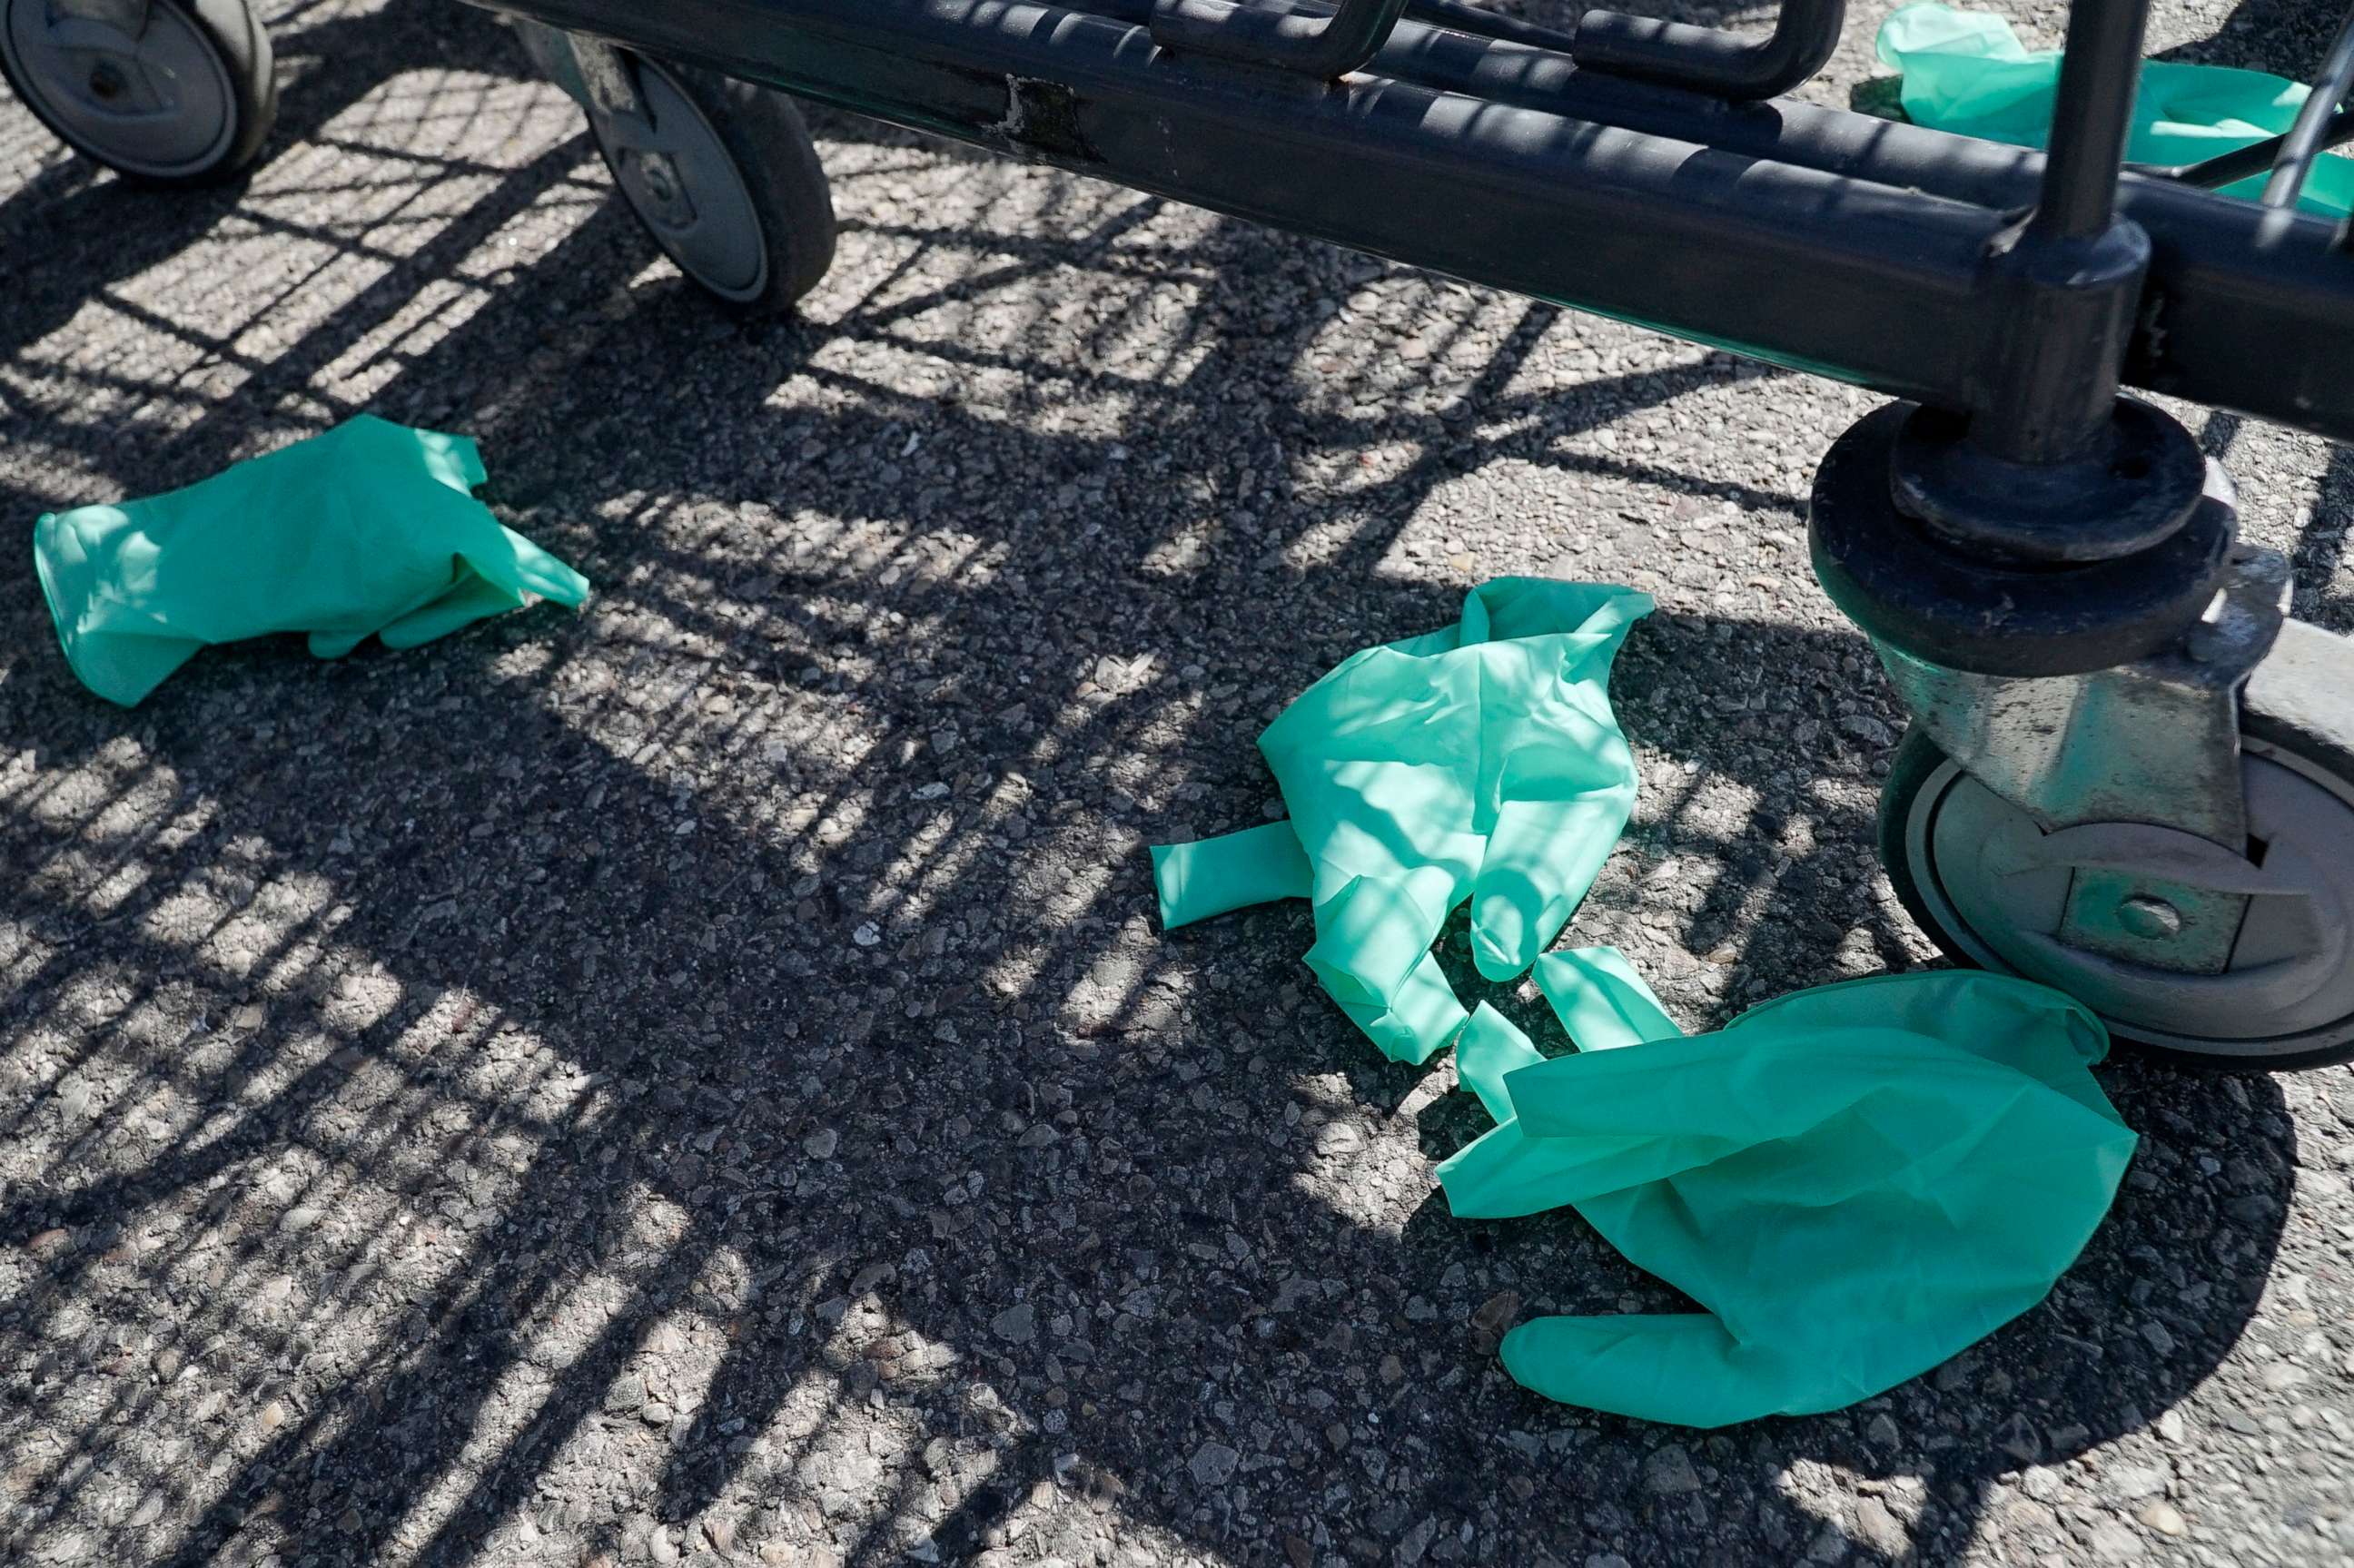 PHOTO:Discarded latex gloves lie on the ground outside of a grocery store in Glenview, Ill., April 5, 2020.